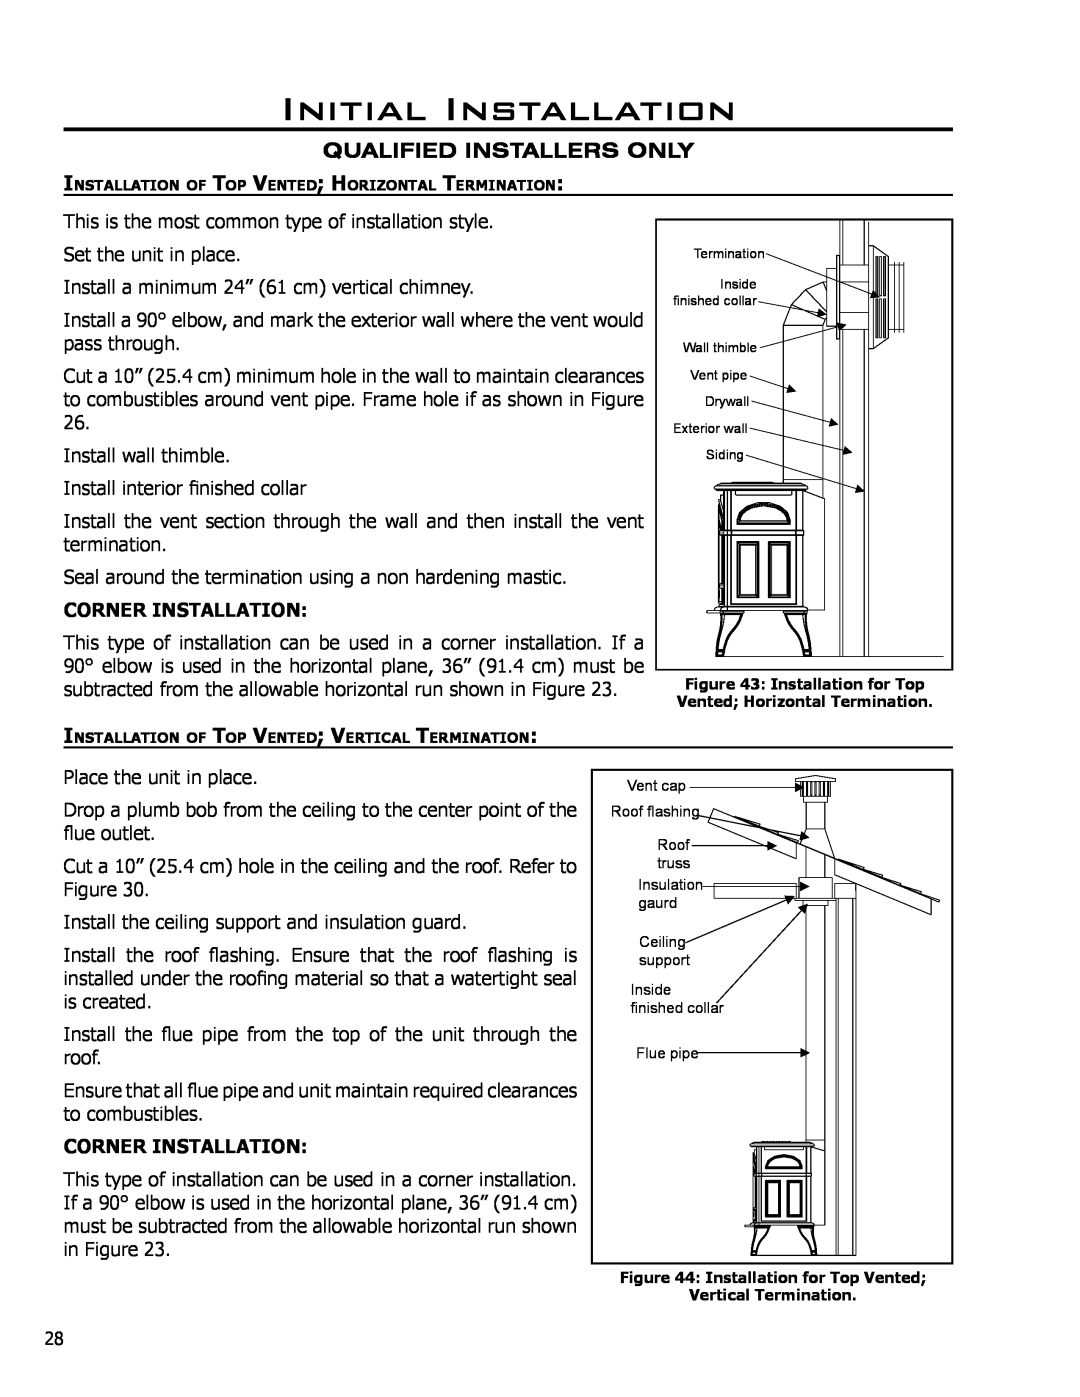 Enviro C-10381, C-11290 owner manual Corner Installation, Initial Installation, Qualified Installers Only 